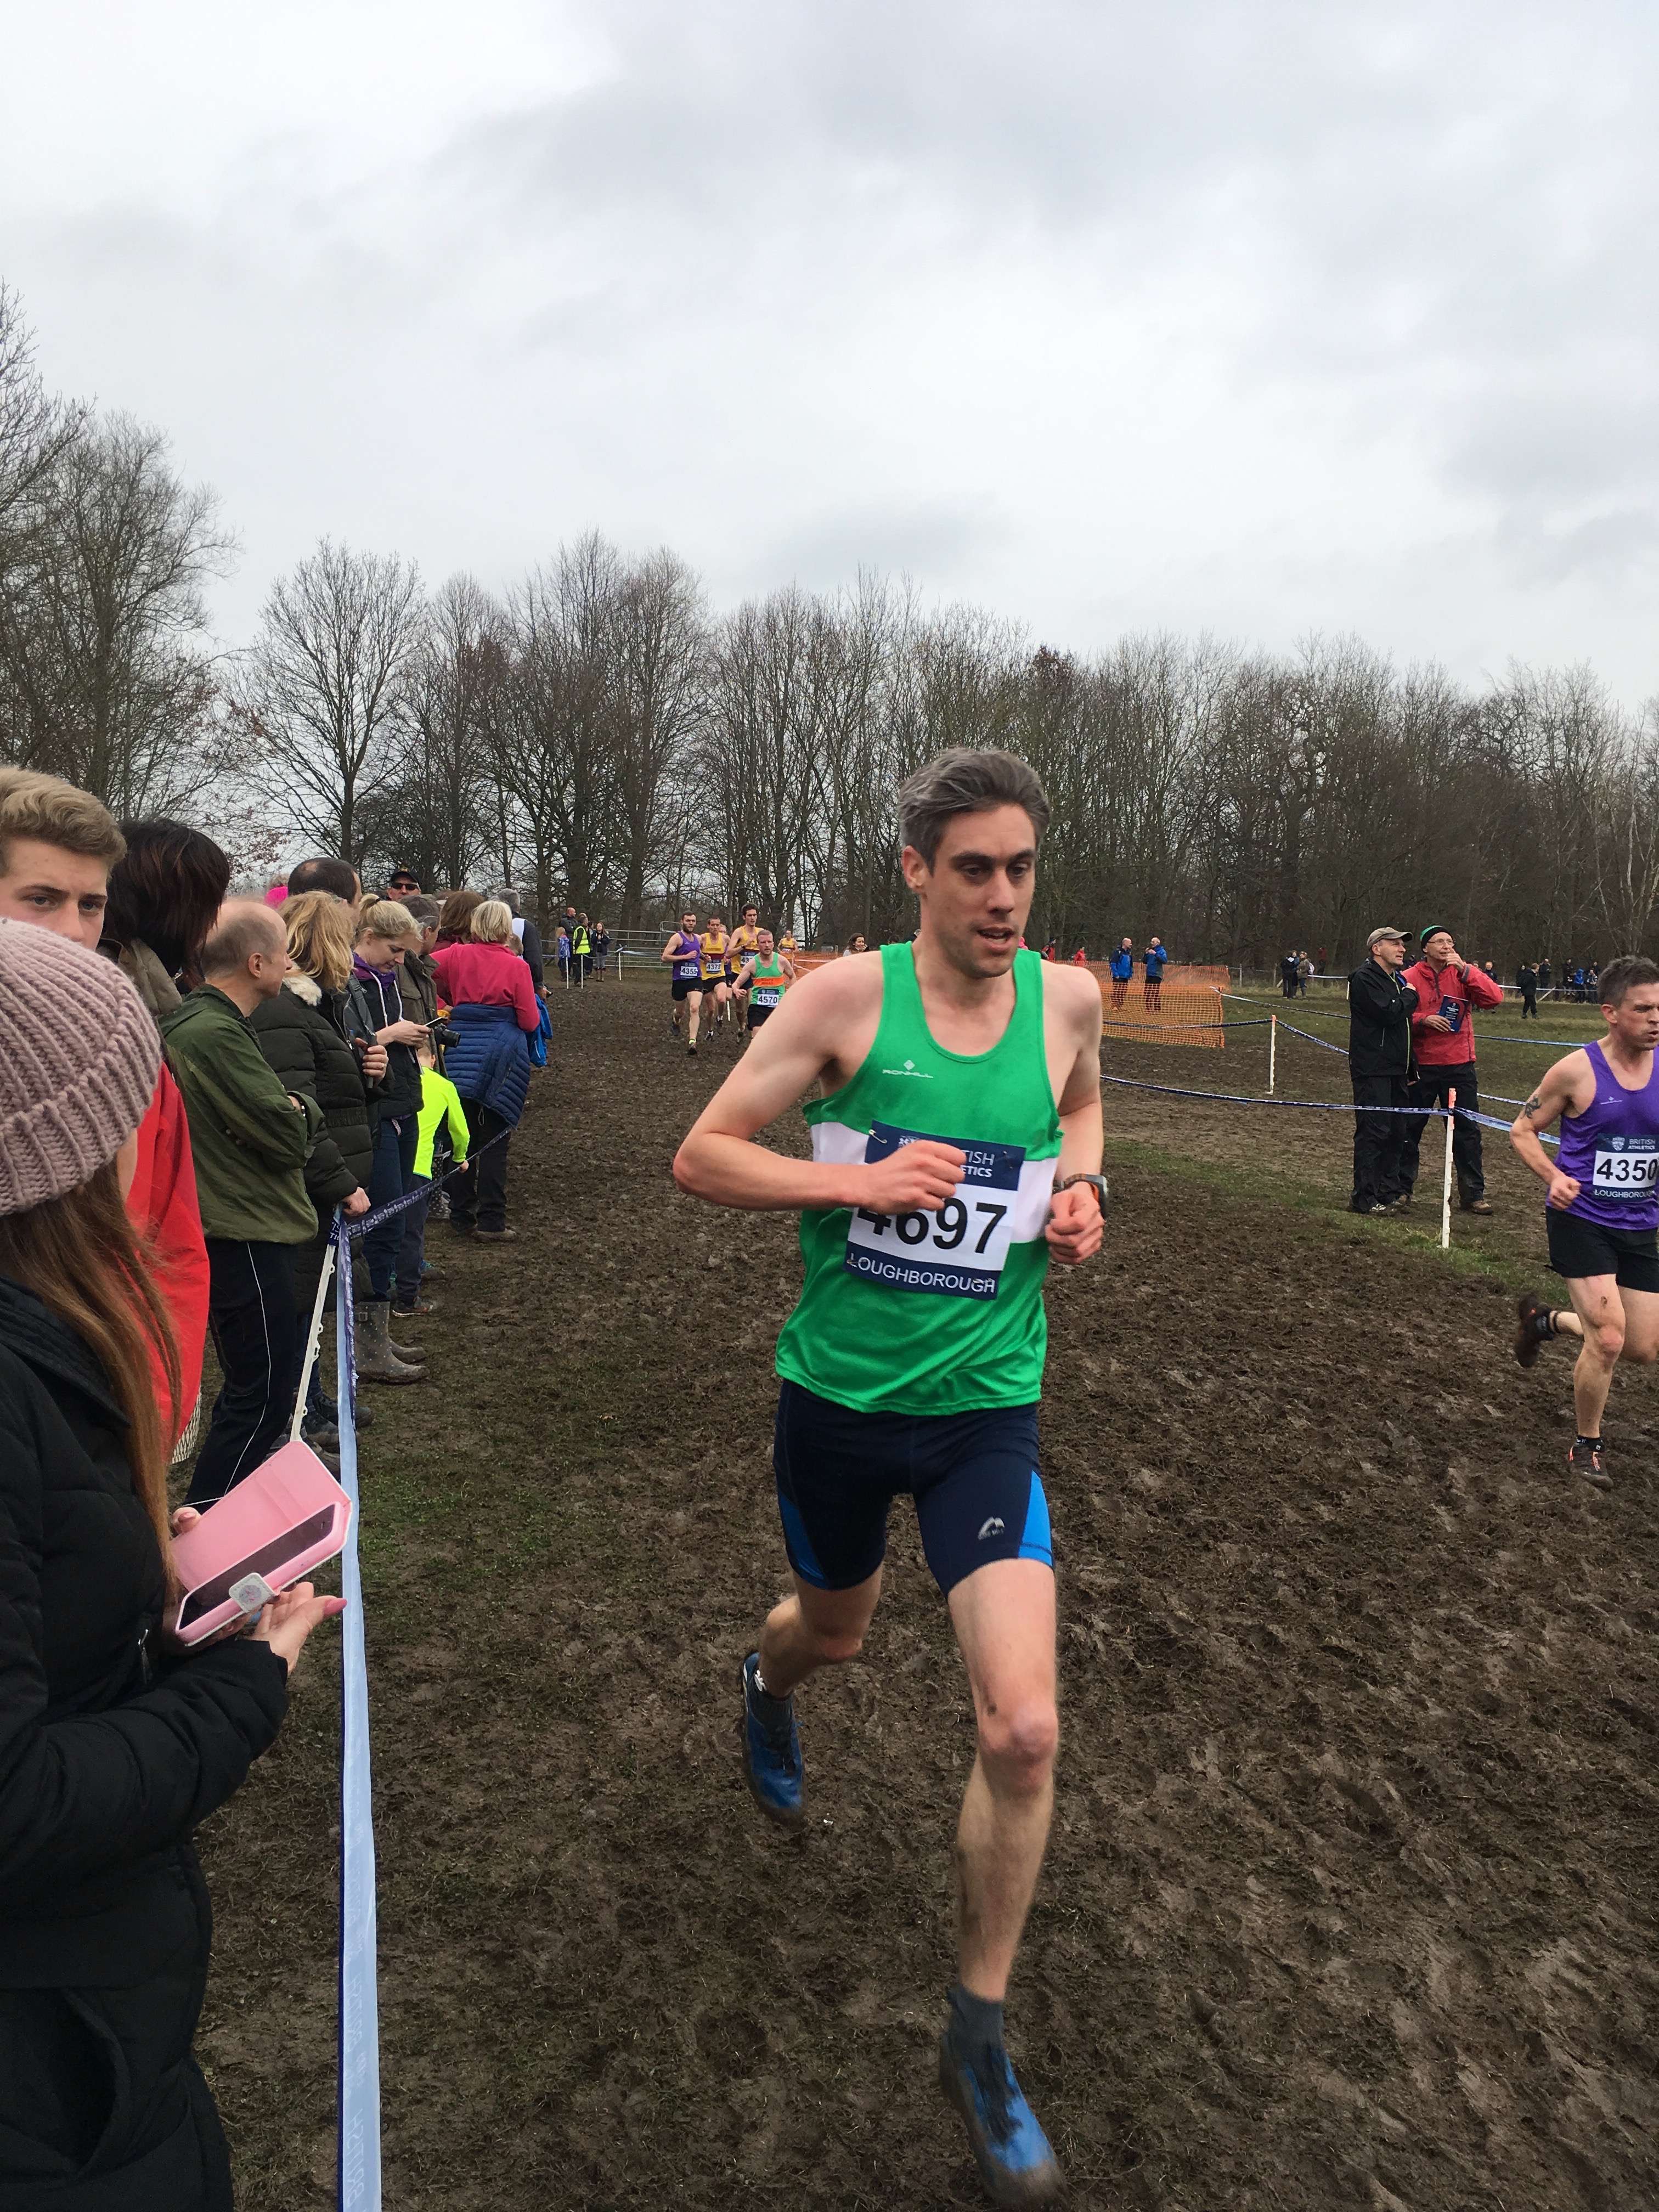 Senior Athlete represents Staffordshire at Inter Counties Cross Country Championships